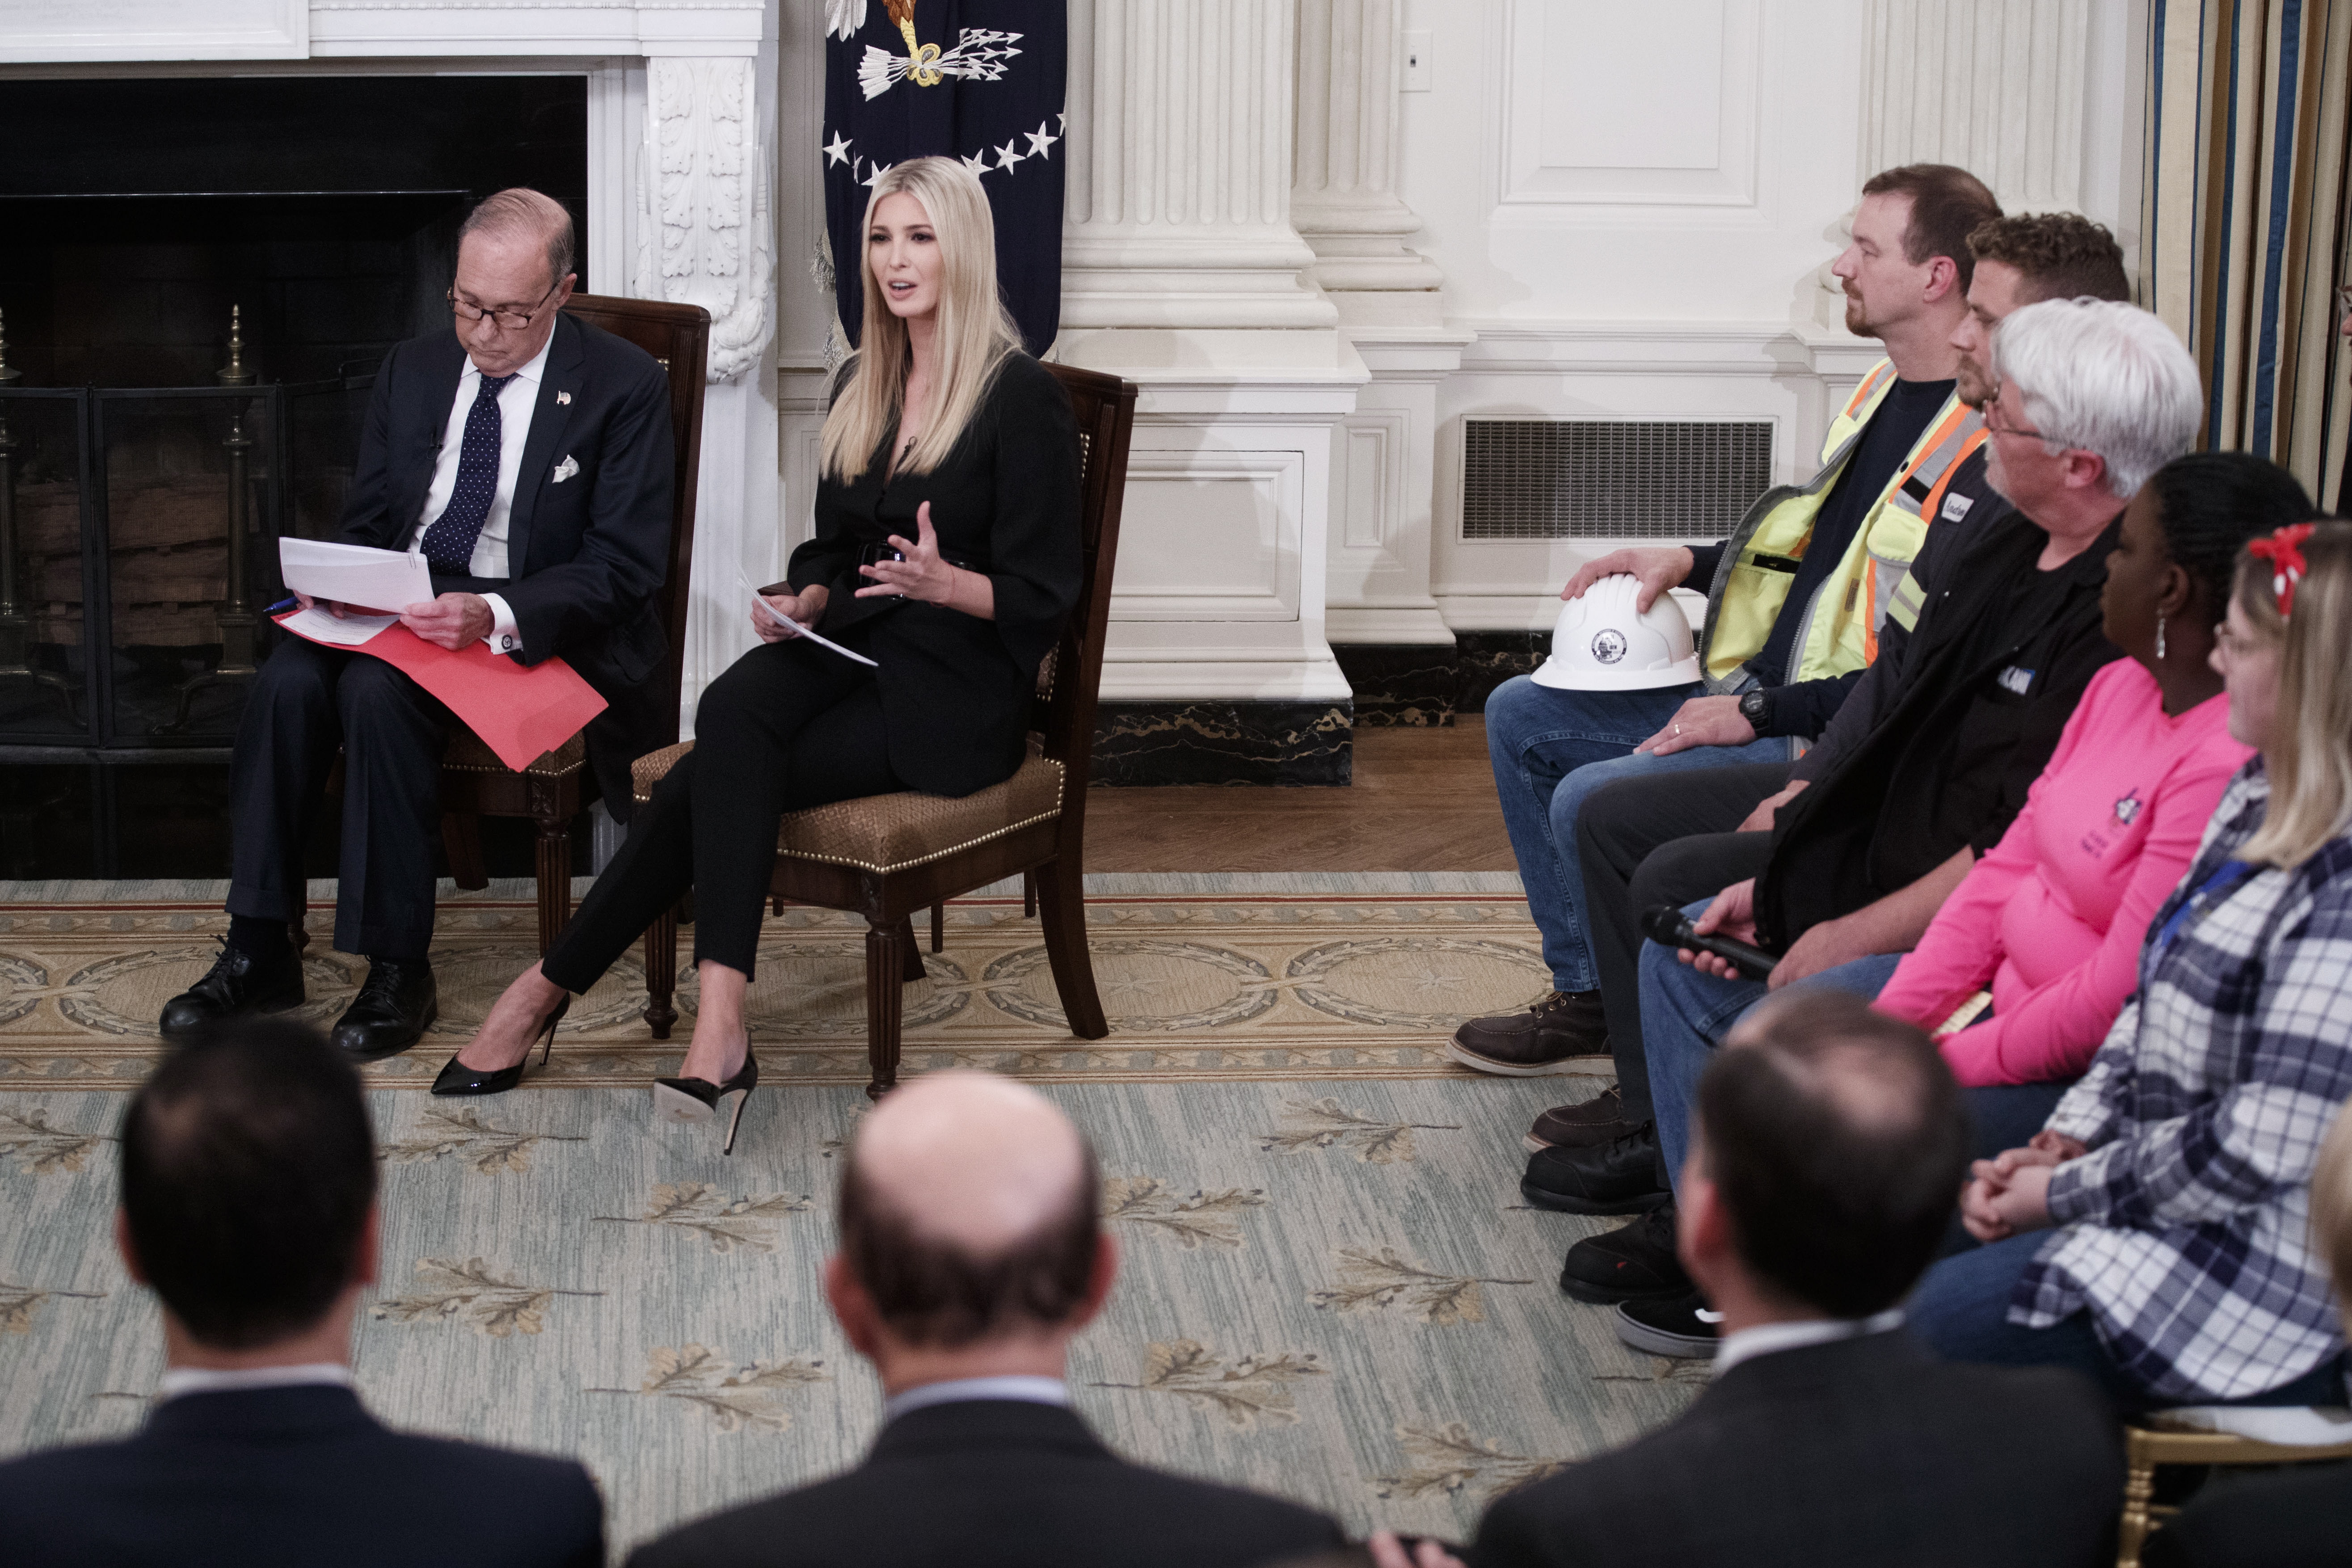 epa07134112 Director of the US National Economic Council Larry Kudlow (L) and Ivanka Trump (2-L) participate in an Our Pledge to America's Workers event in the State Dining Room of the White House in Washington, DC, USA, 31 October 2018.  EPA/SHAWN THEW